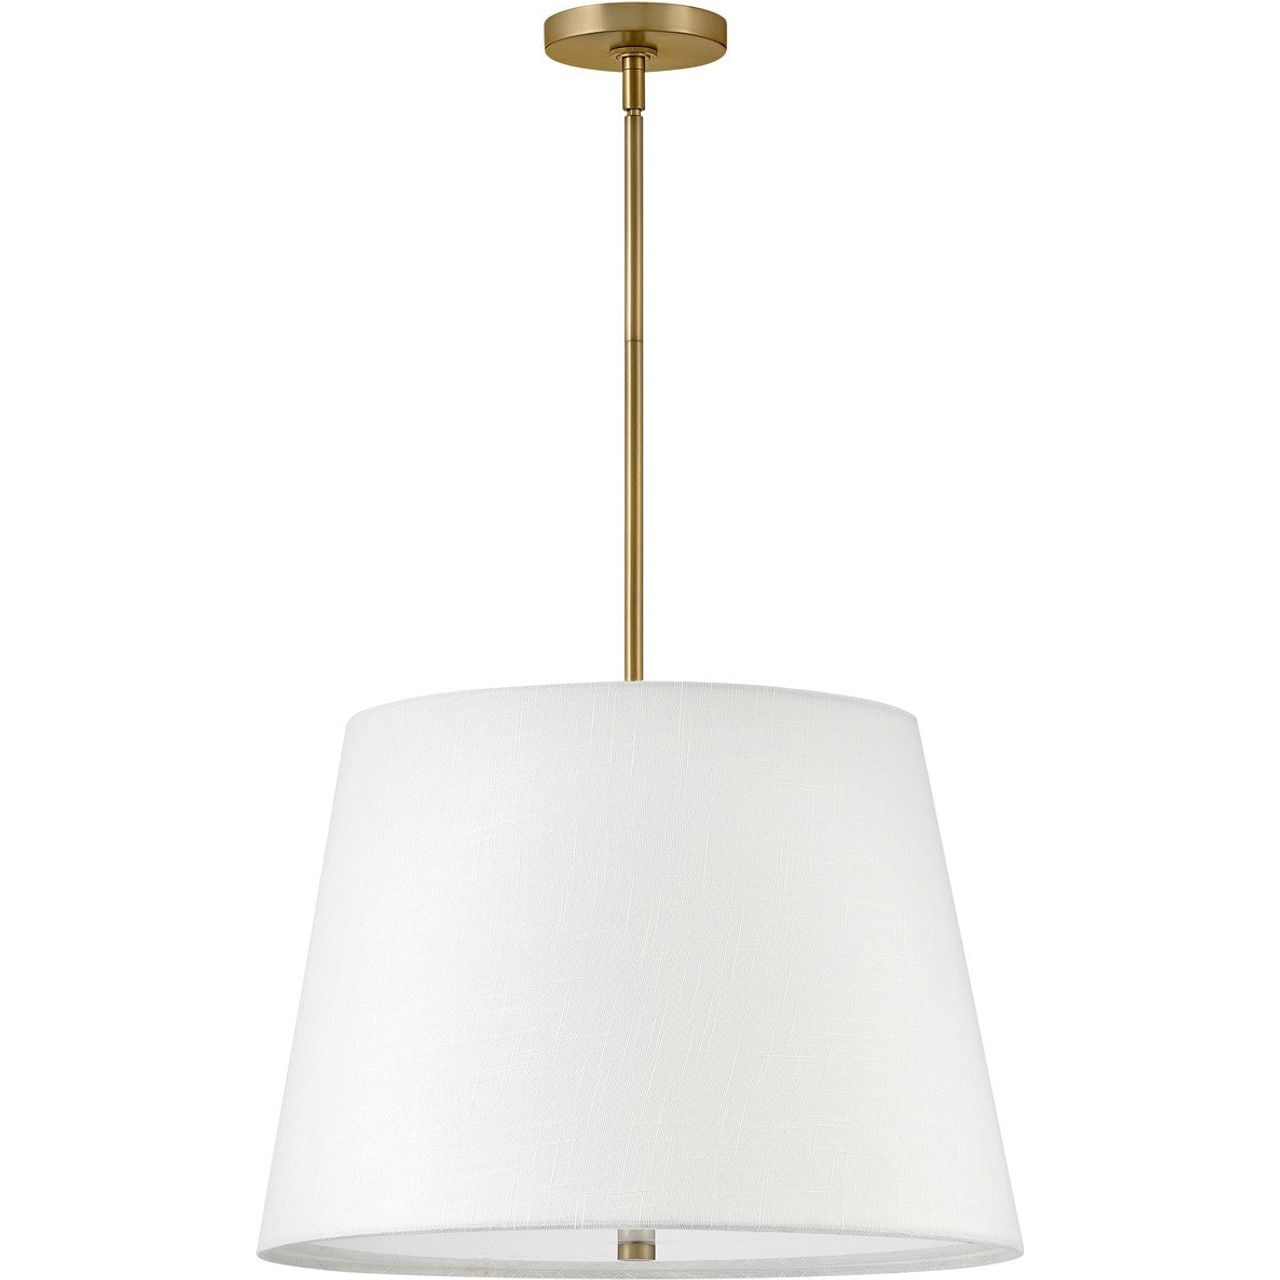 Lark Canada - 83777LCB - LED Convertible Pendant - Beale - Lacquered Brass